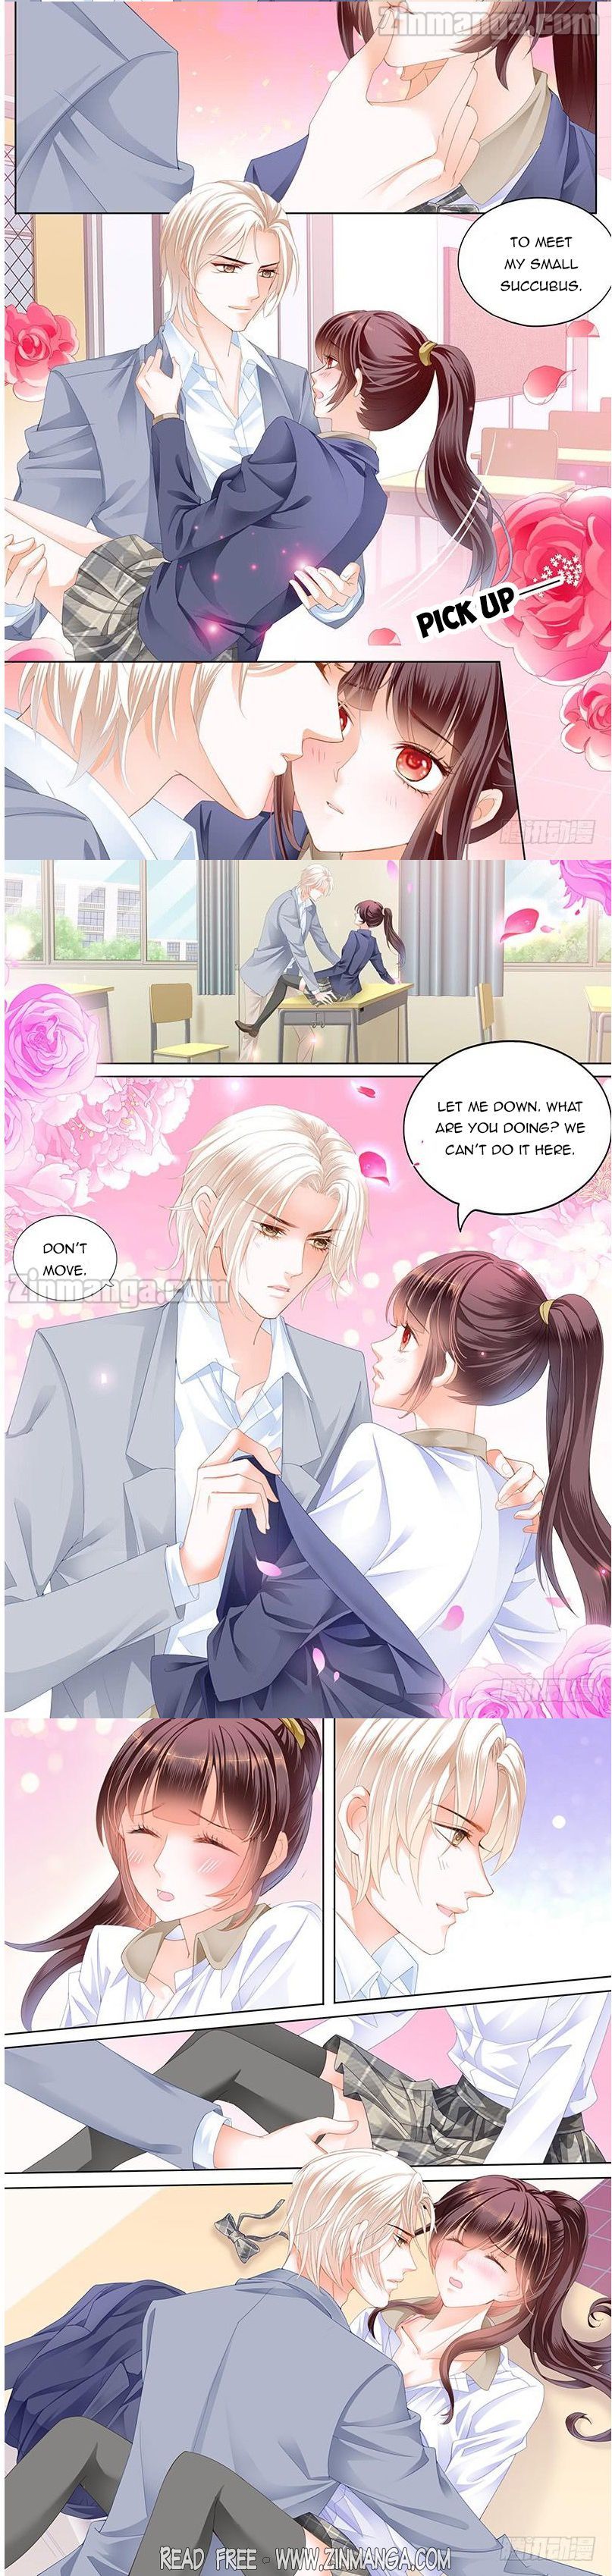 The Beautiful Wife of the Whirlwind Marriage Chapter 154